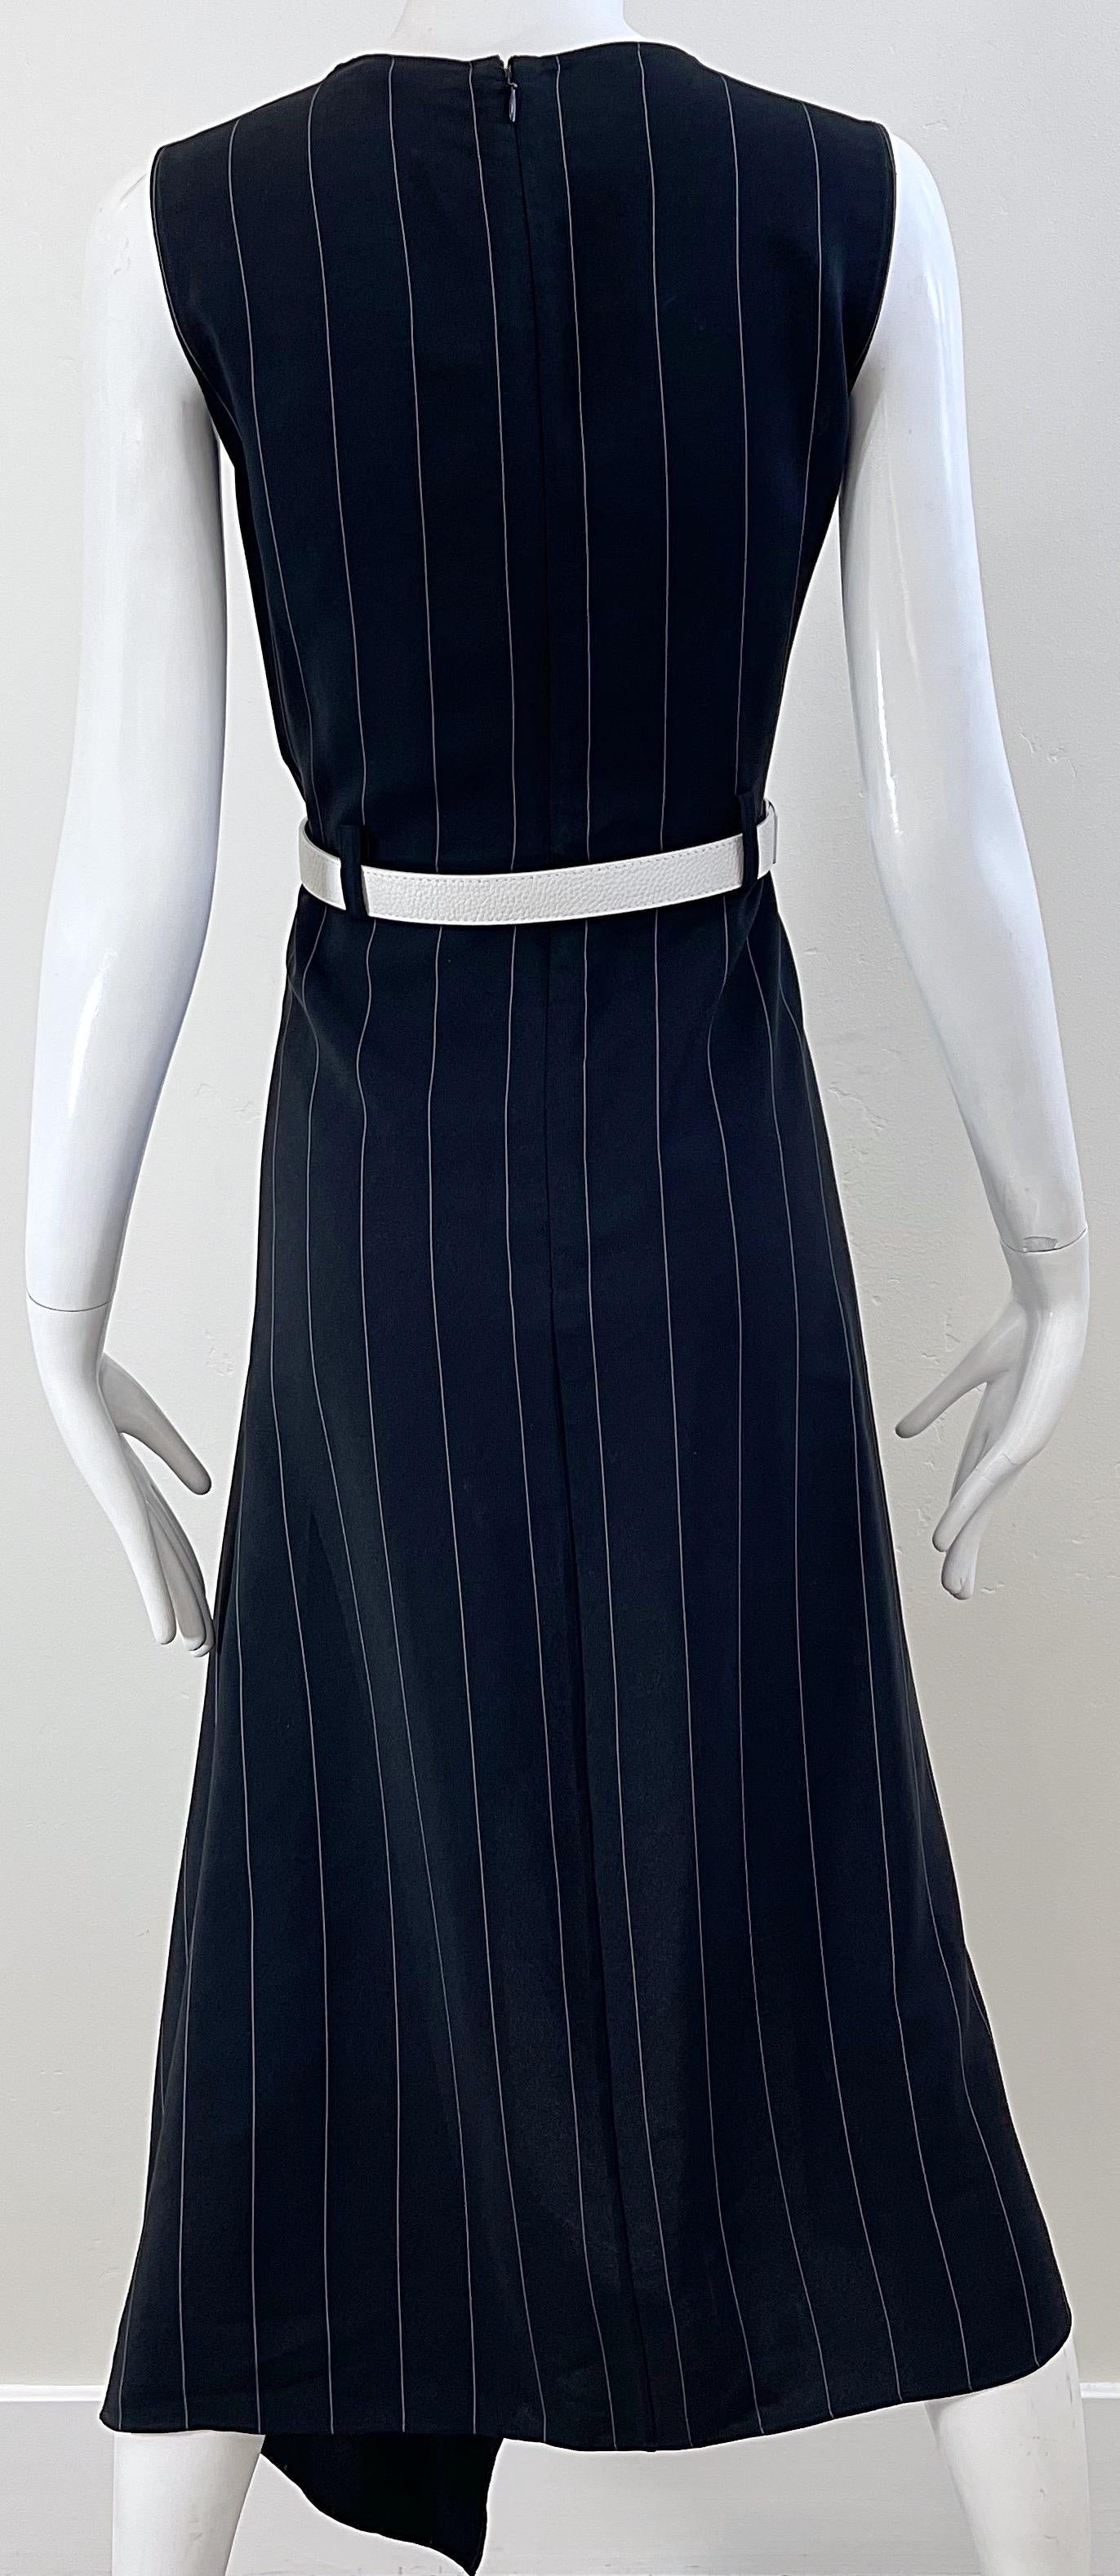 2000s Thierry Mugler Black and White Size 38 / 6 Pinstripe Hi-Lo Vintage Dress For Sale 1